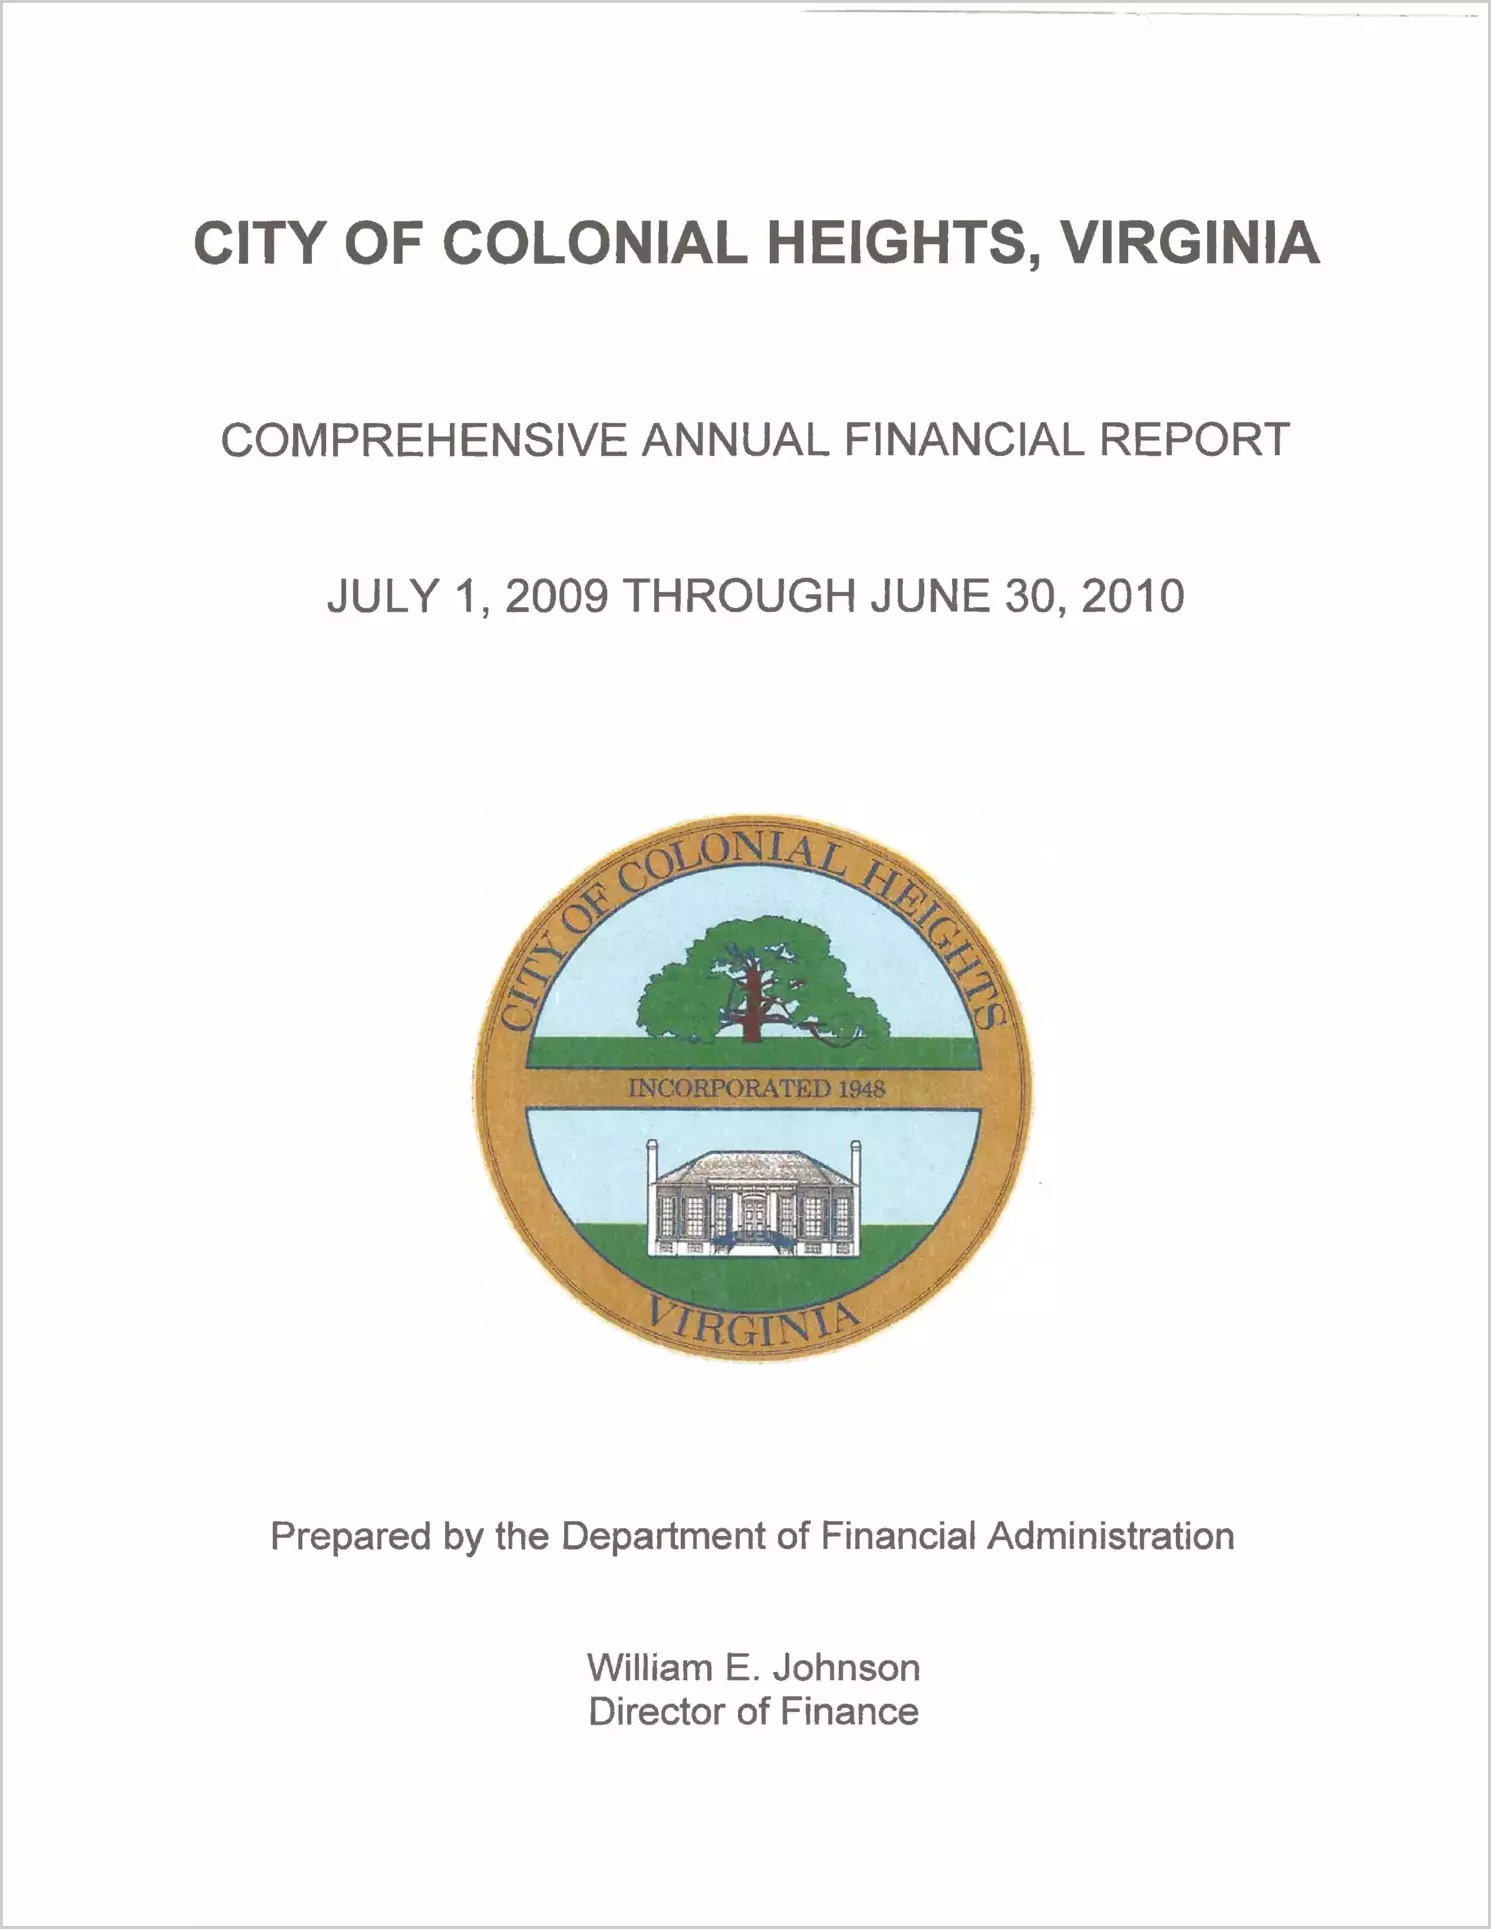 2010 Annual Financial Report for City of Colonial Heights